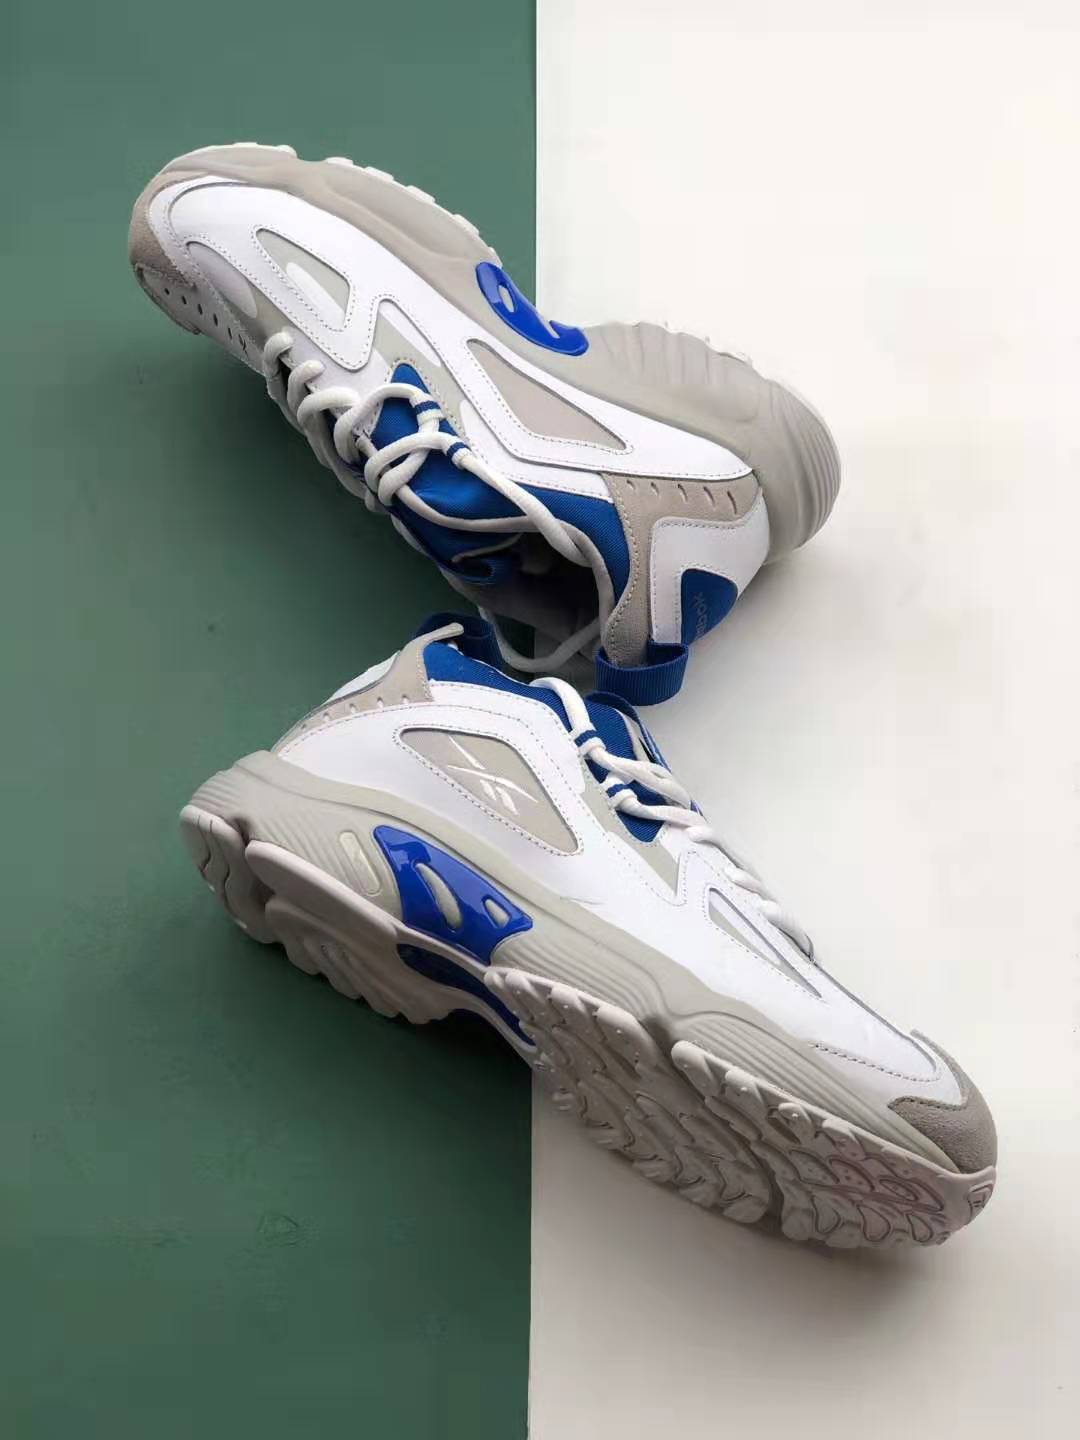 Reebok DMX Series 1200 LT 'White' DV7541 - Premium Sneakers for Unmatched Style and Comfort